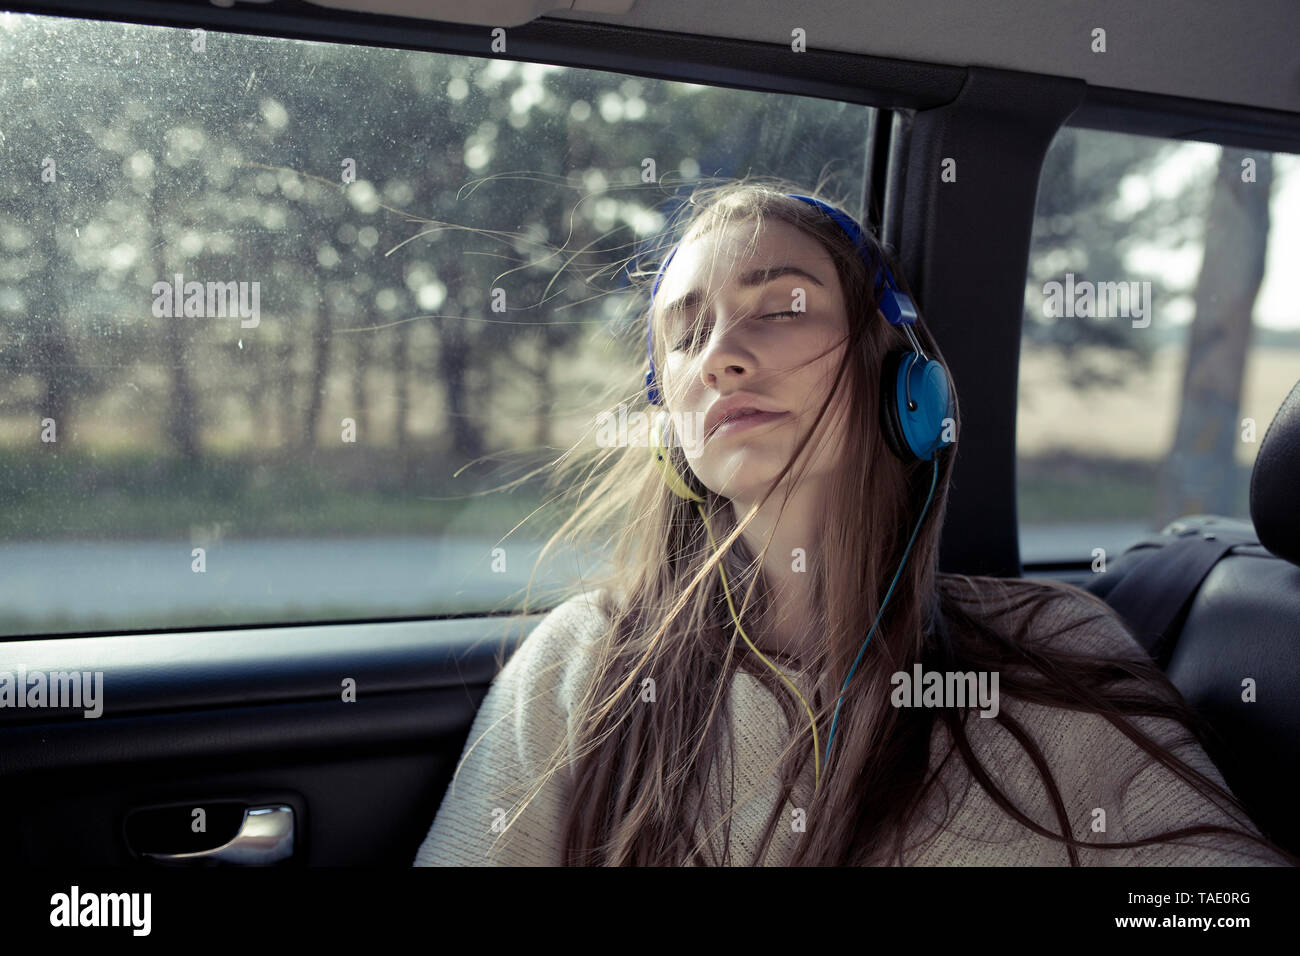 Young woman with windswept hair in a car wearing headphones Stock Photo